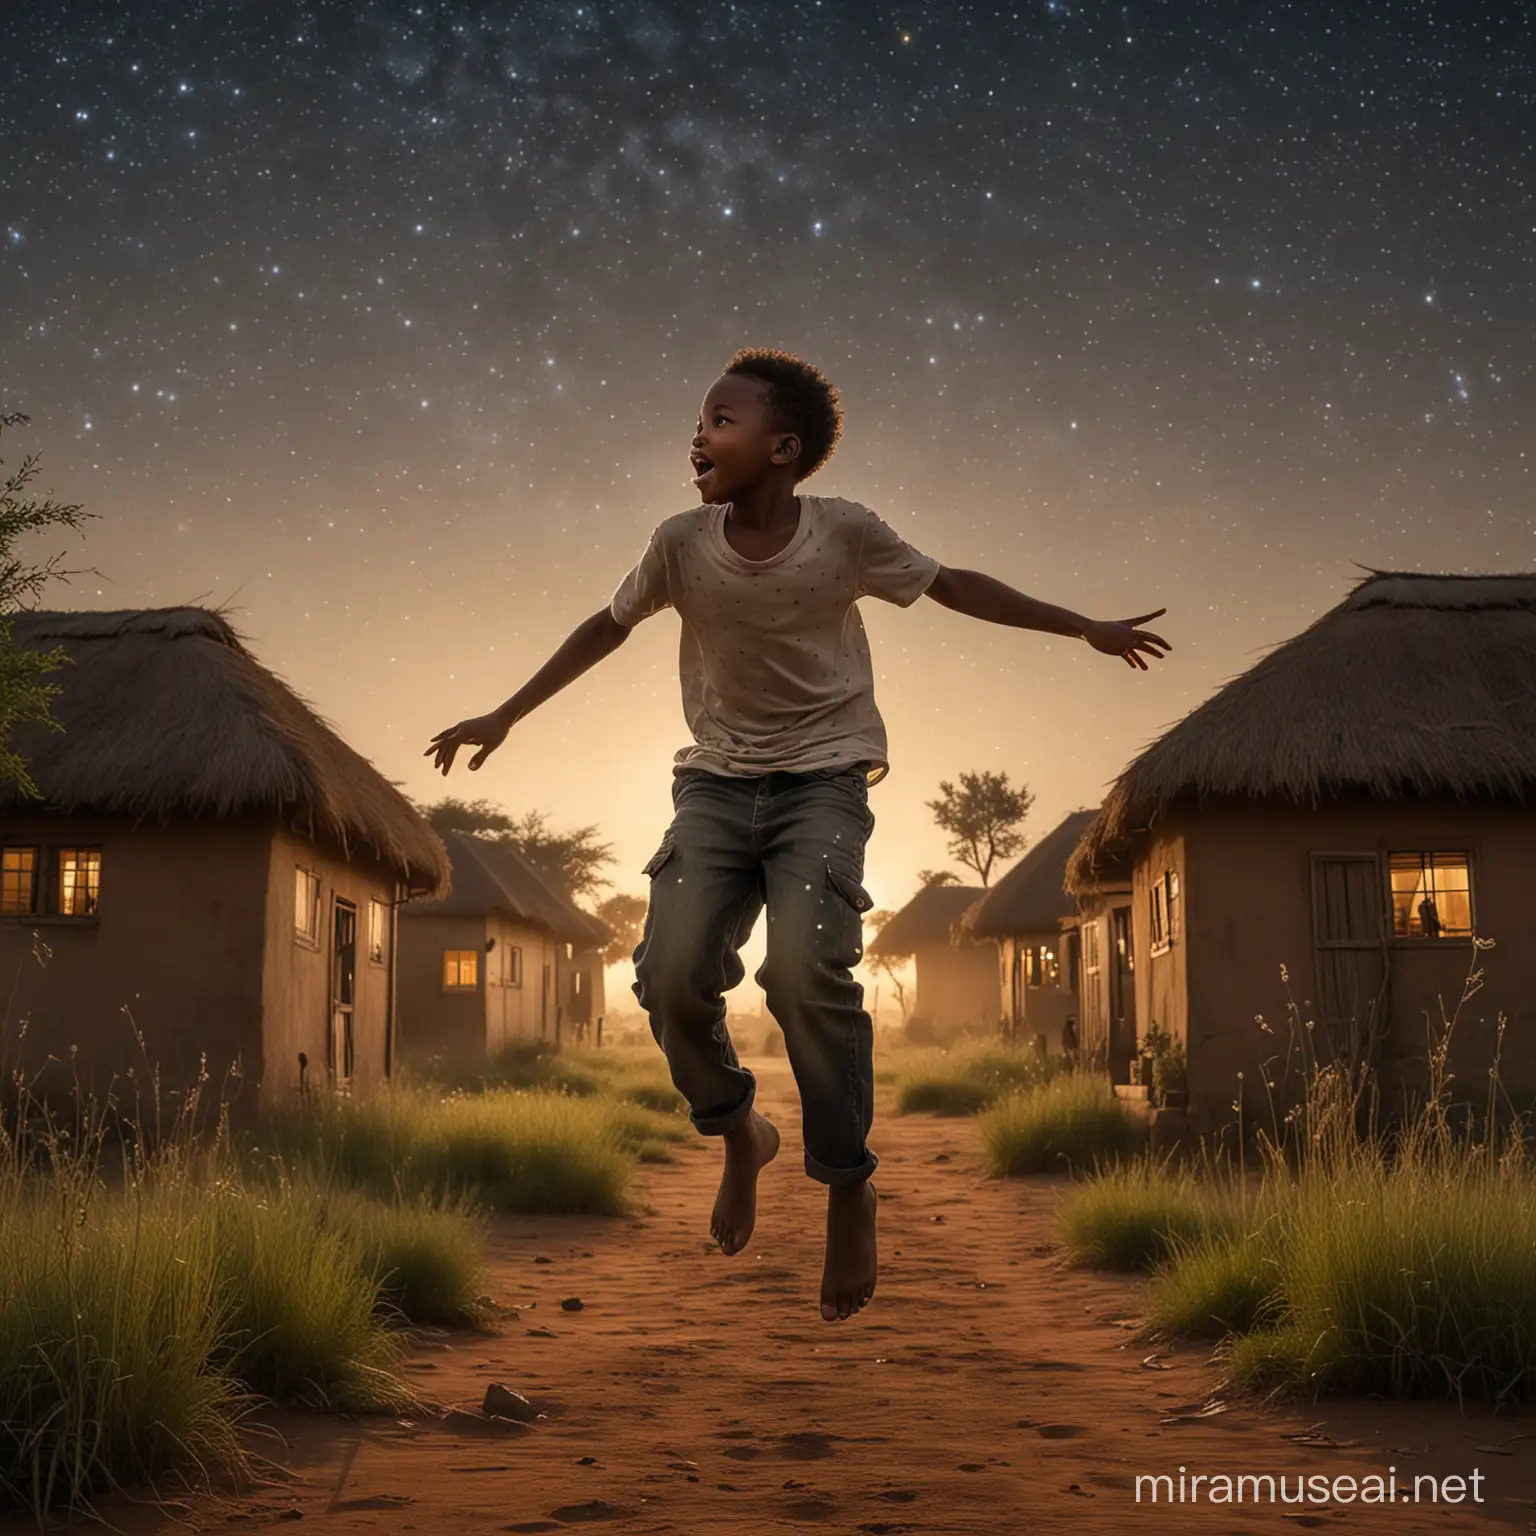 GIVE ME A PICTURE OF AN AFRICAN BOY WHO IS JUMPING AND HIS HEAD IS FACING BACKWARDS AND BEHIND HIM THE BACKGROUND OF AN AFRICAN VILLAGE THAT HAS A LOT OF GRASS, AND AROUND THE BOY ARE TWINKLING STARS, GIVE ME THIS PICTURE WITH HIGH RESOLUTION AND HIGH EXPOSURE AND REALISTIC